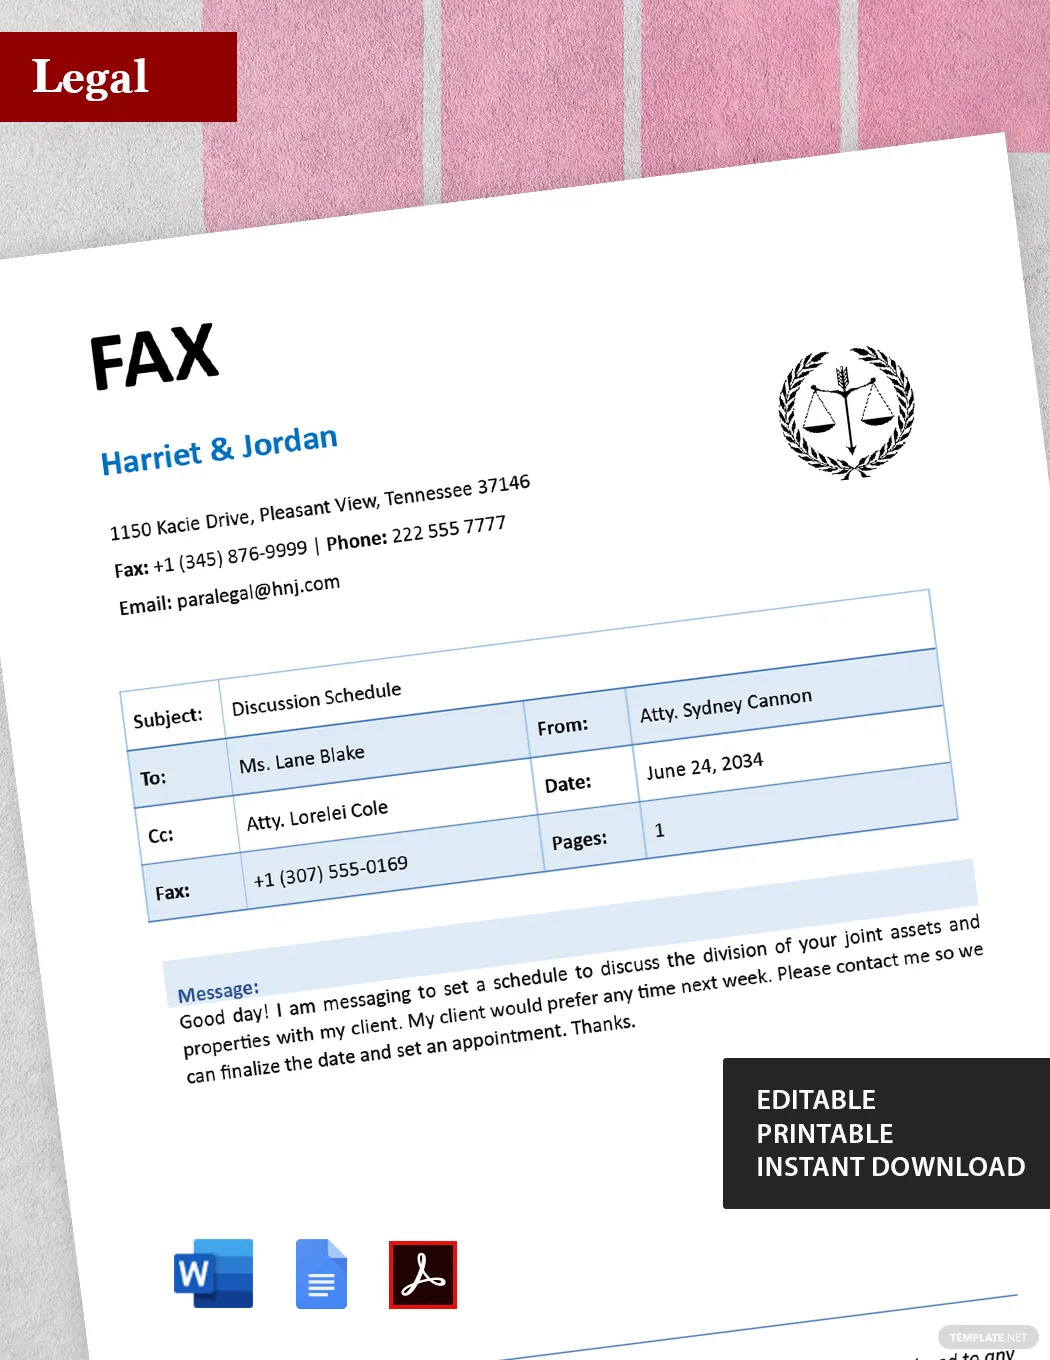 law-firm-fax-cover-sheet-ideas-and-examples